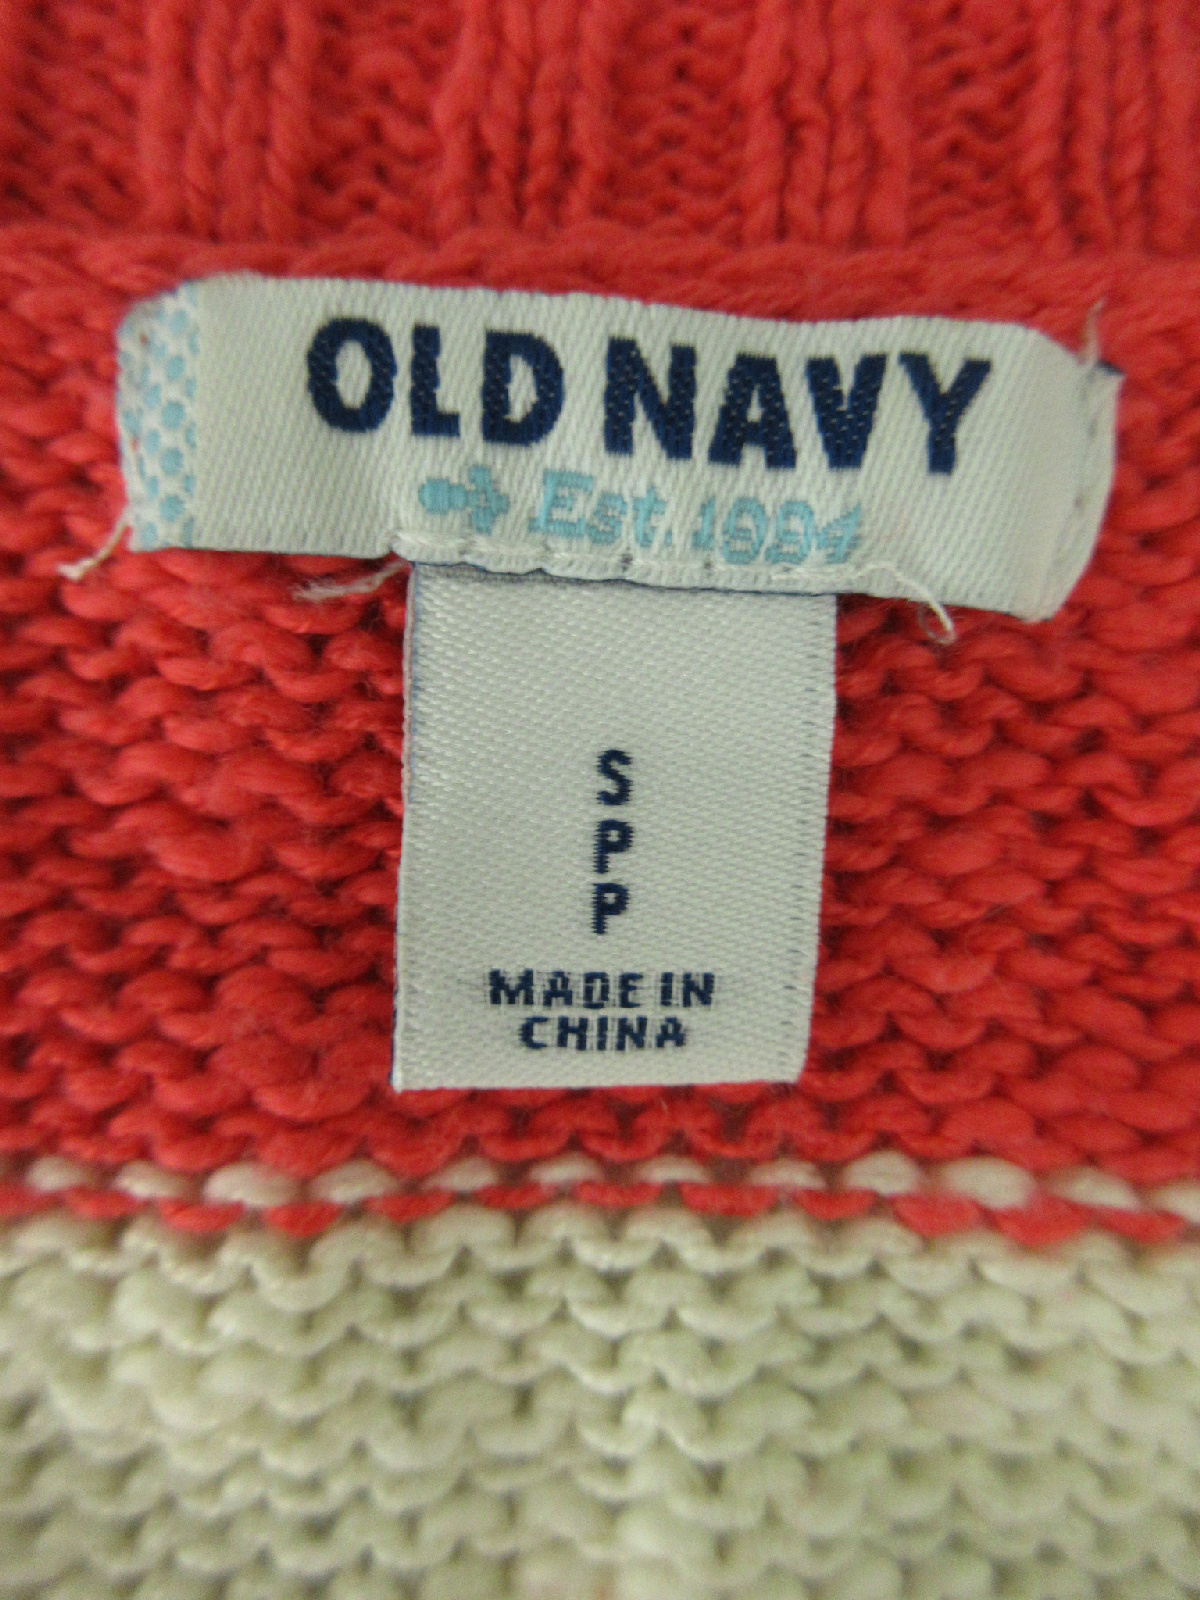 old navy return policy